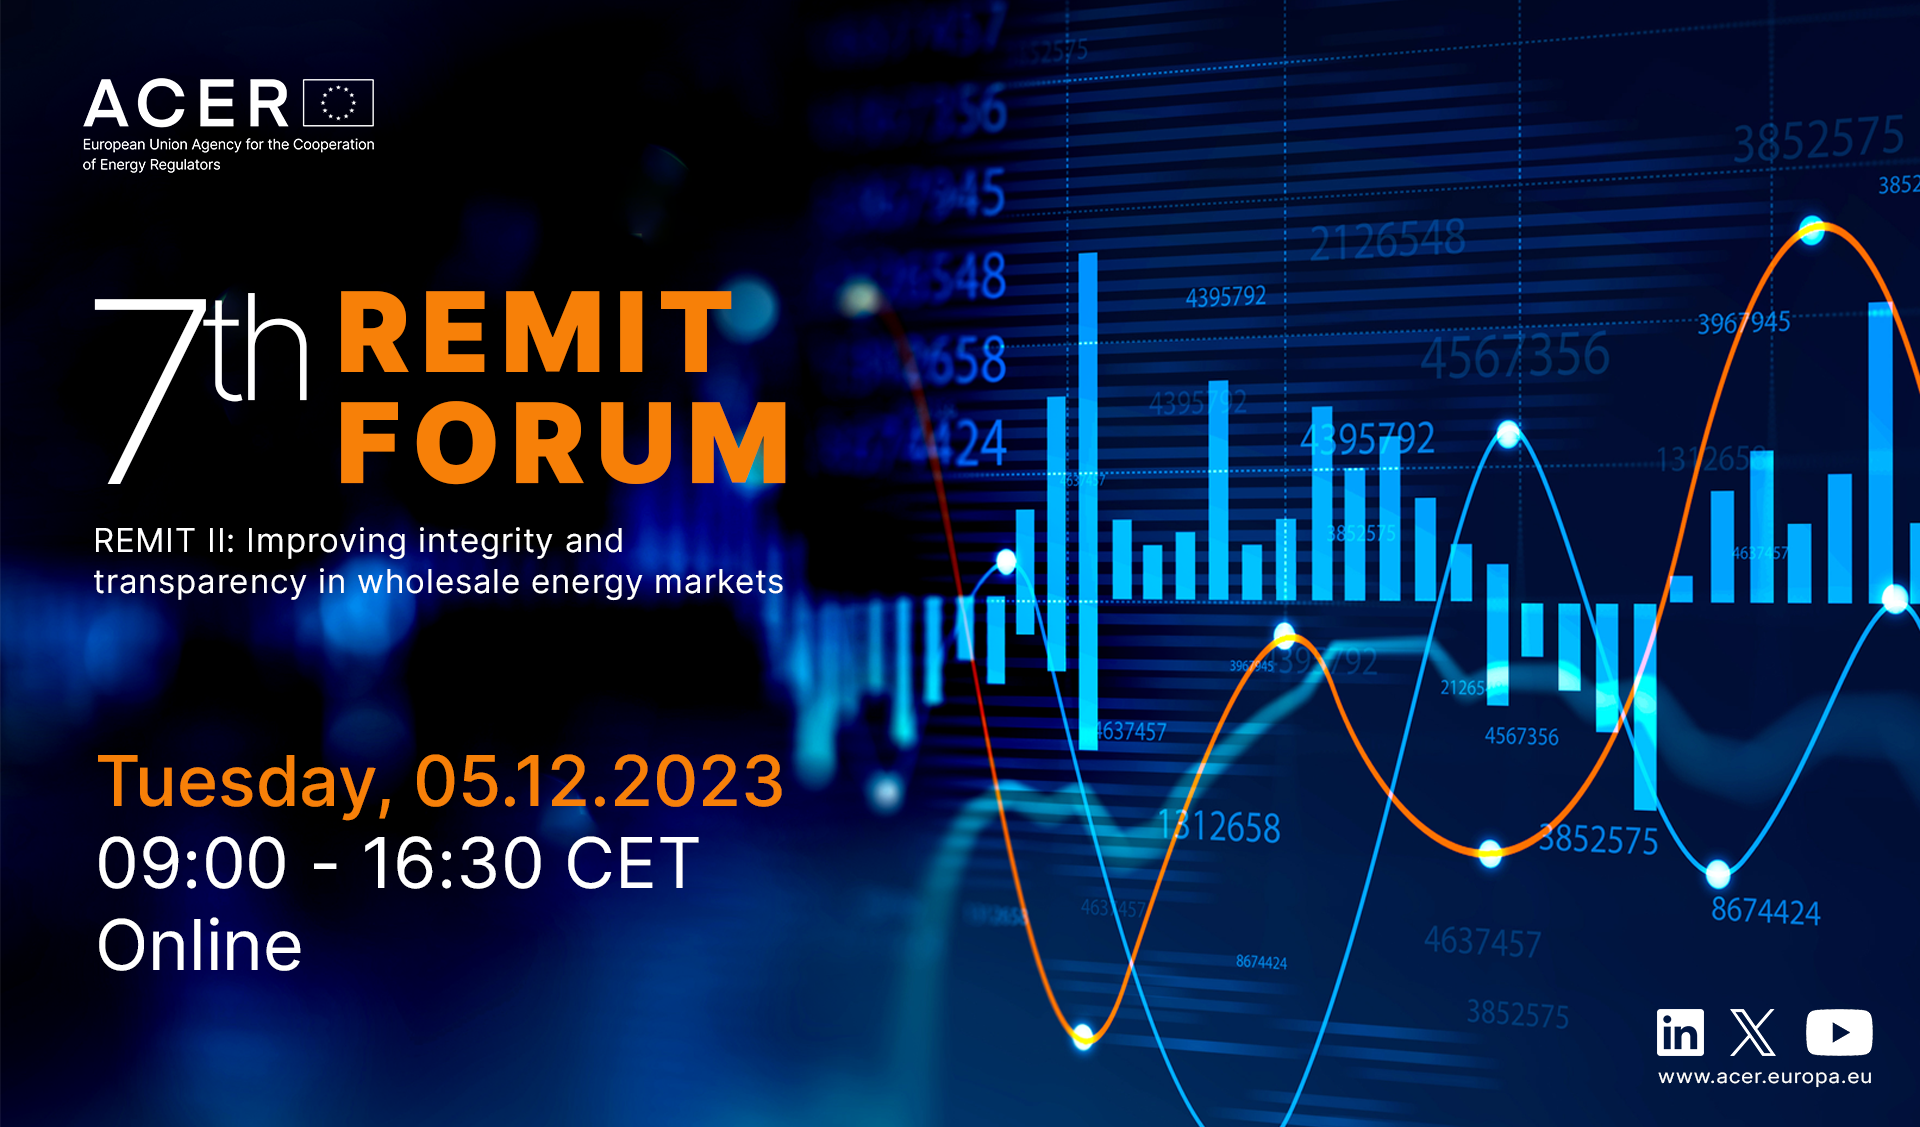 7th REMIT Forum – REMIT II: Improving integrity and transparency in wholesale energy markets